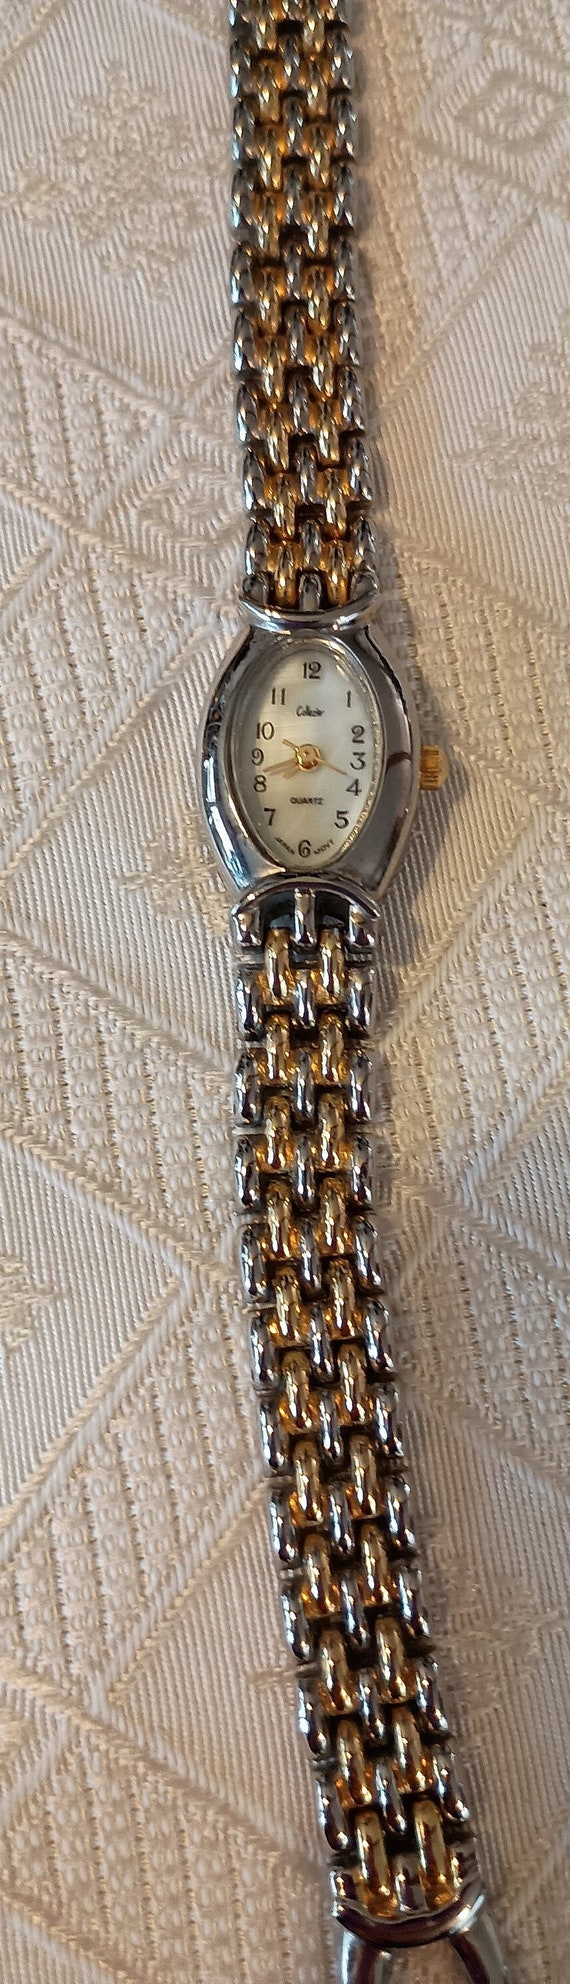 vintage collezio gold and silver tone watch